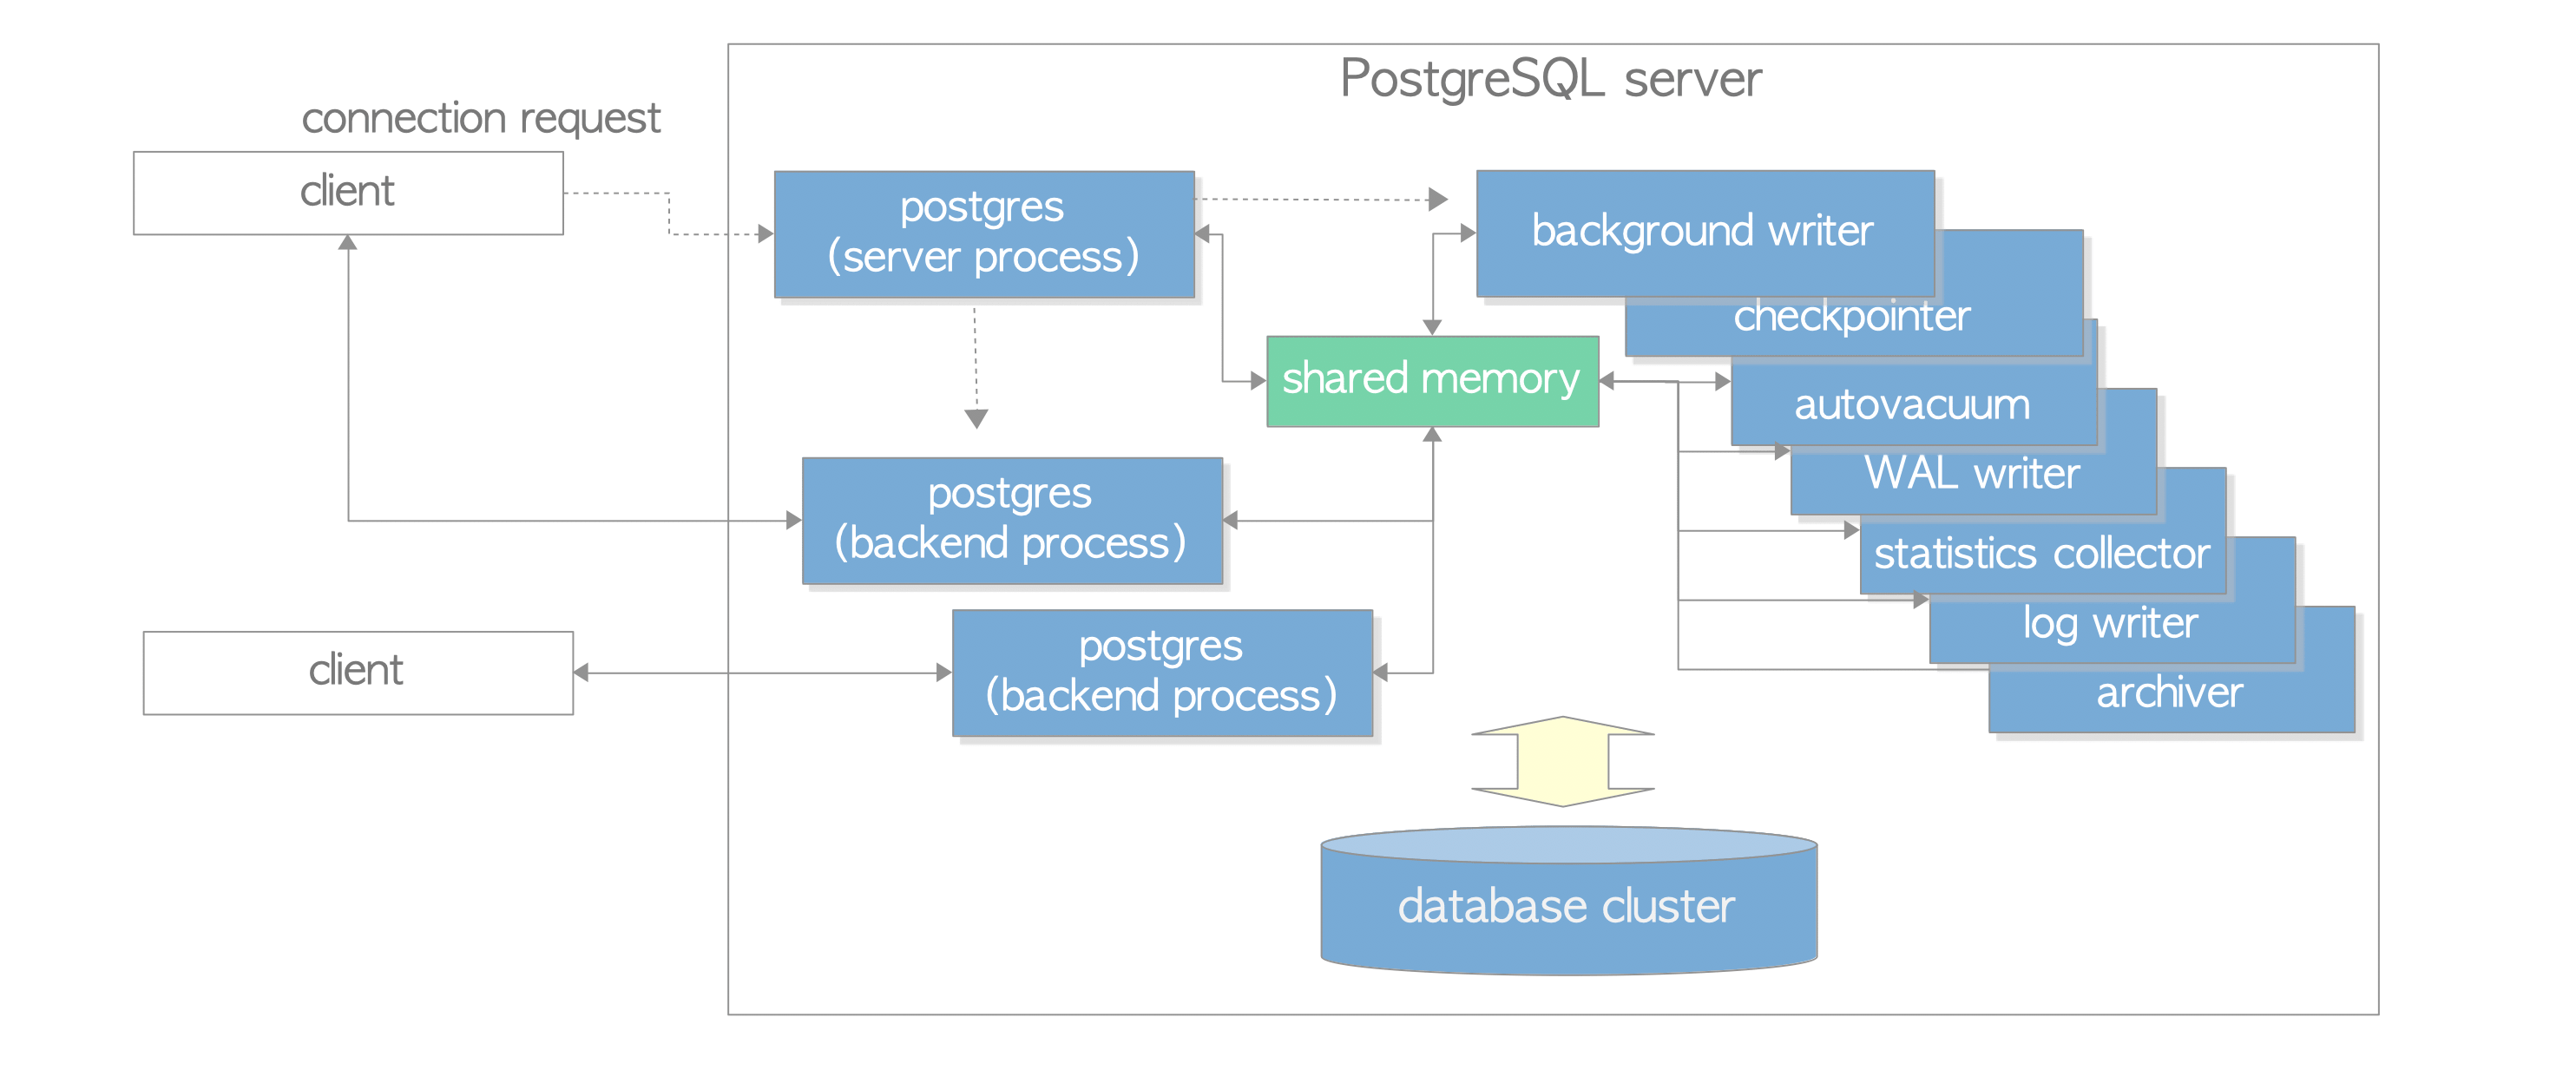 Fig. 2.1. An example of the process architecture in PostgreSQL.